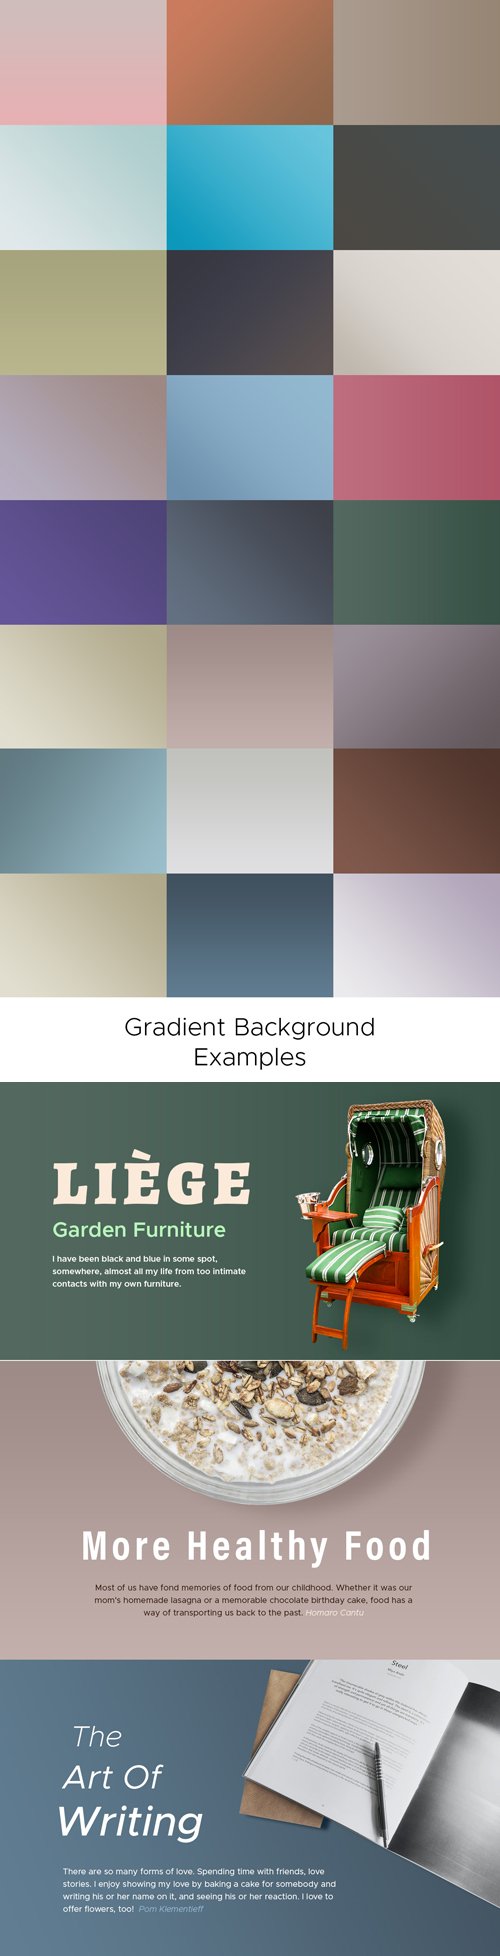 25 Professional Gradient Backgrounds for Photoshop GRD